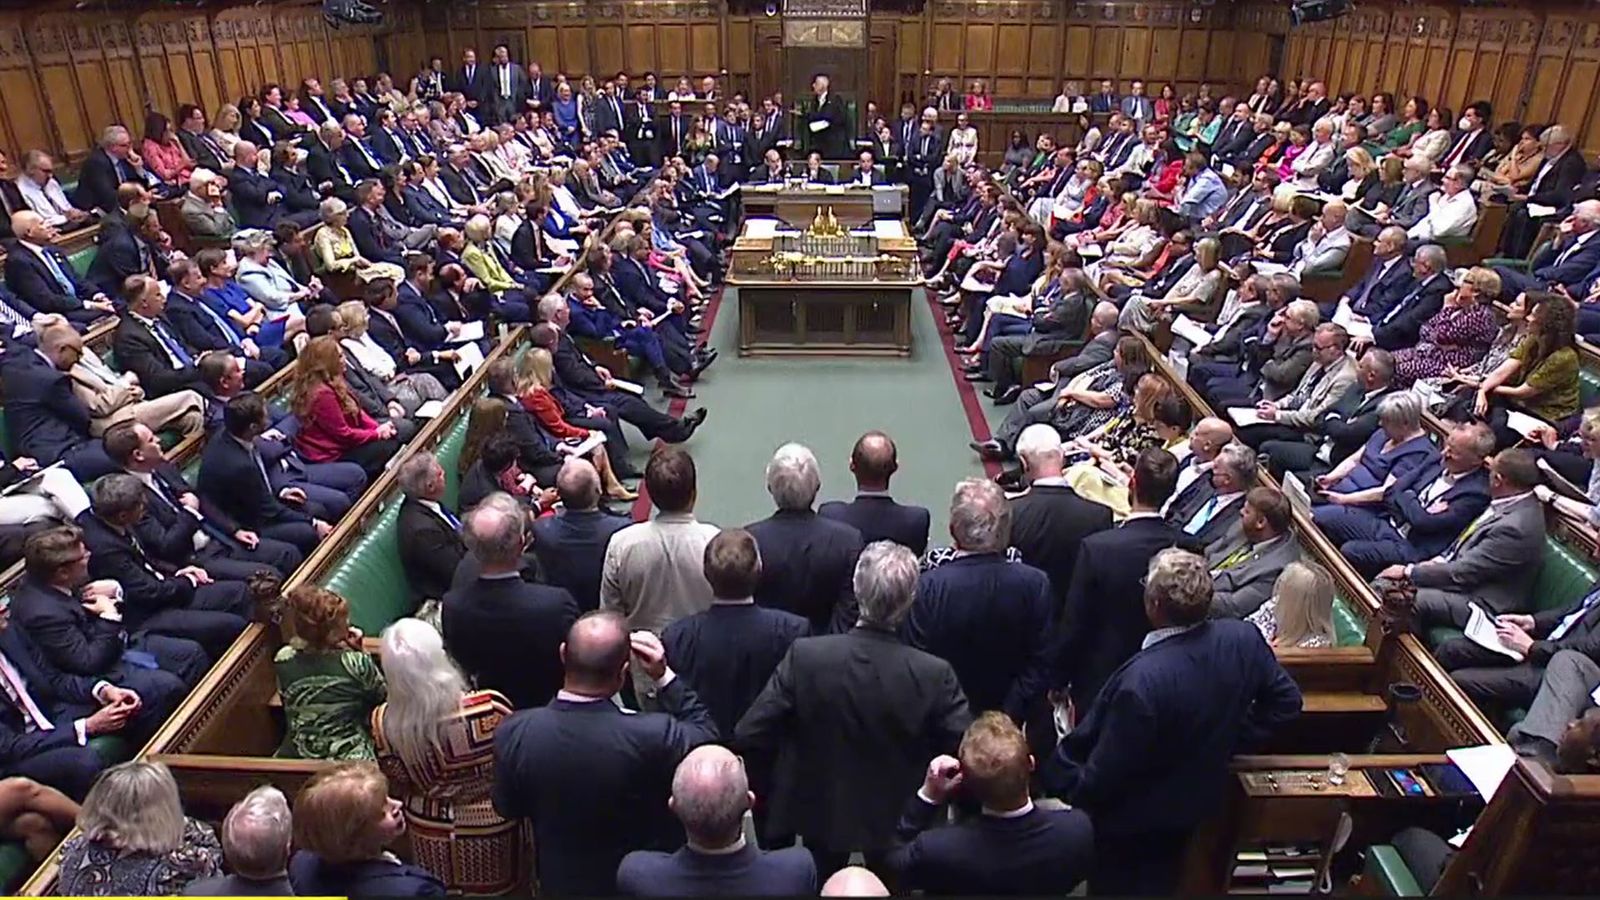 What does it mean for MPs to 'lose the whip' in Parliament?